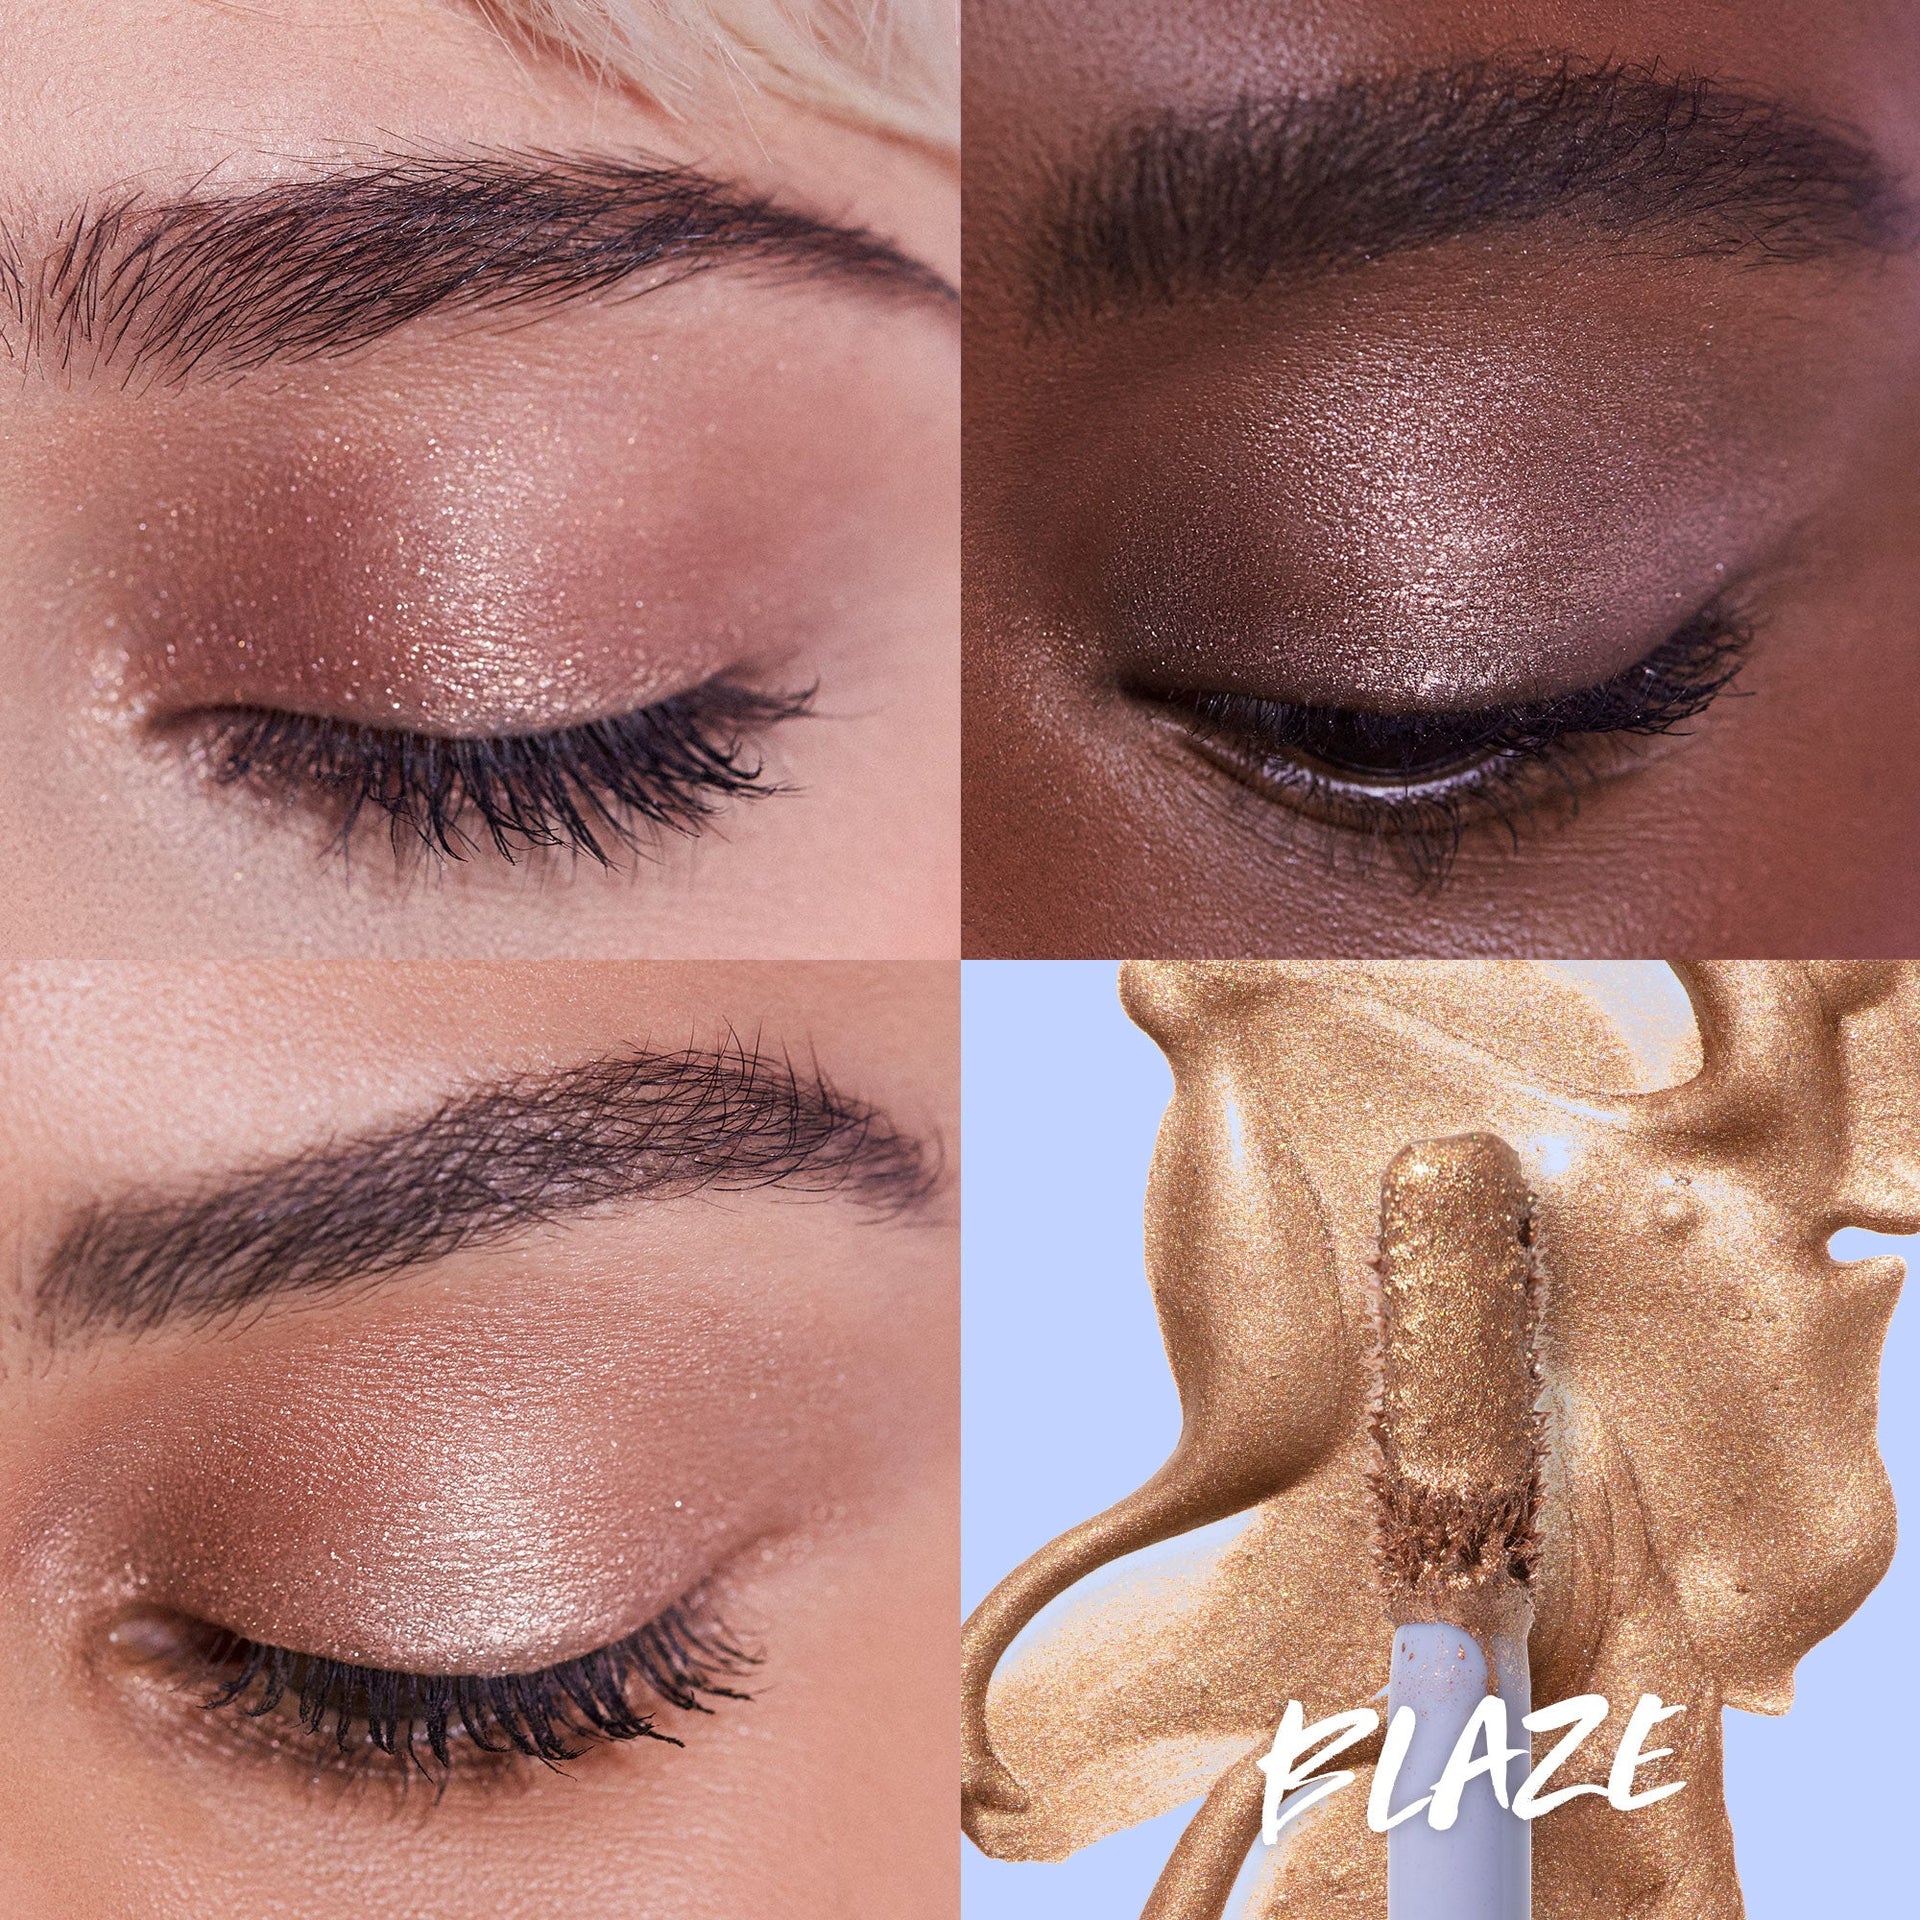 Close-up image featuring swatches of 10-second eye in the shade Blaze when applied on different skin tones.